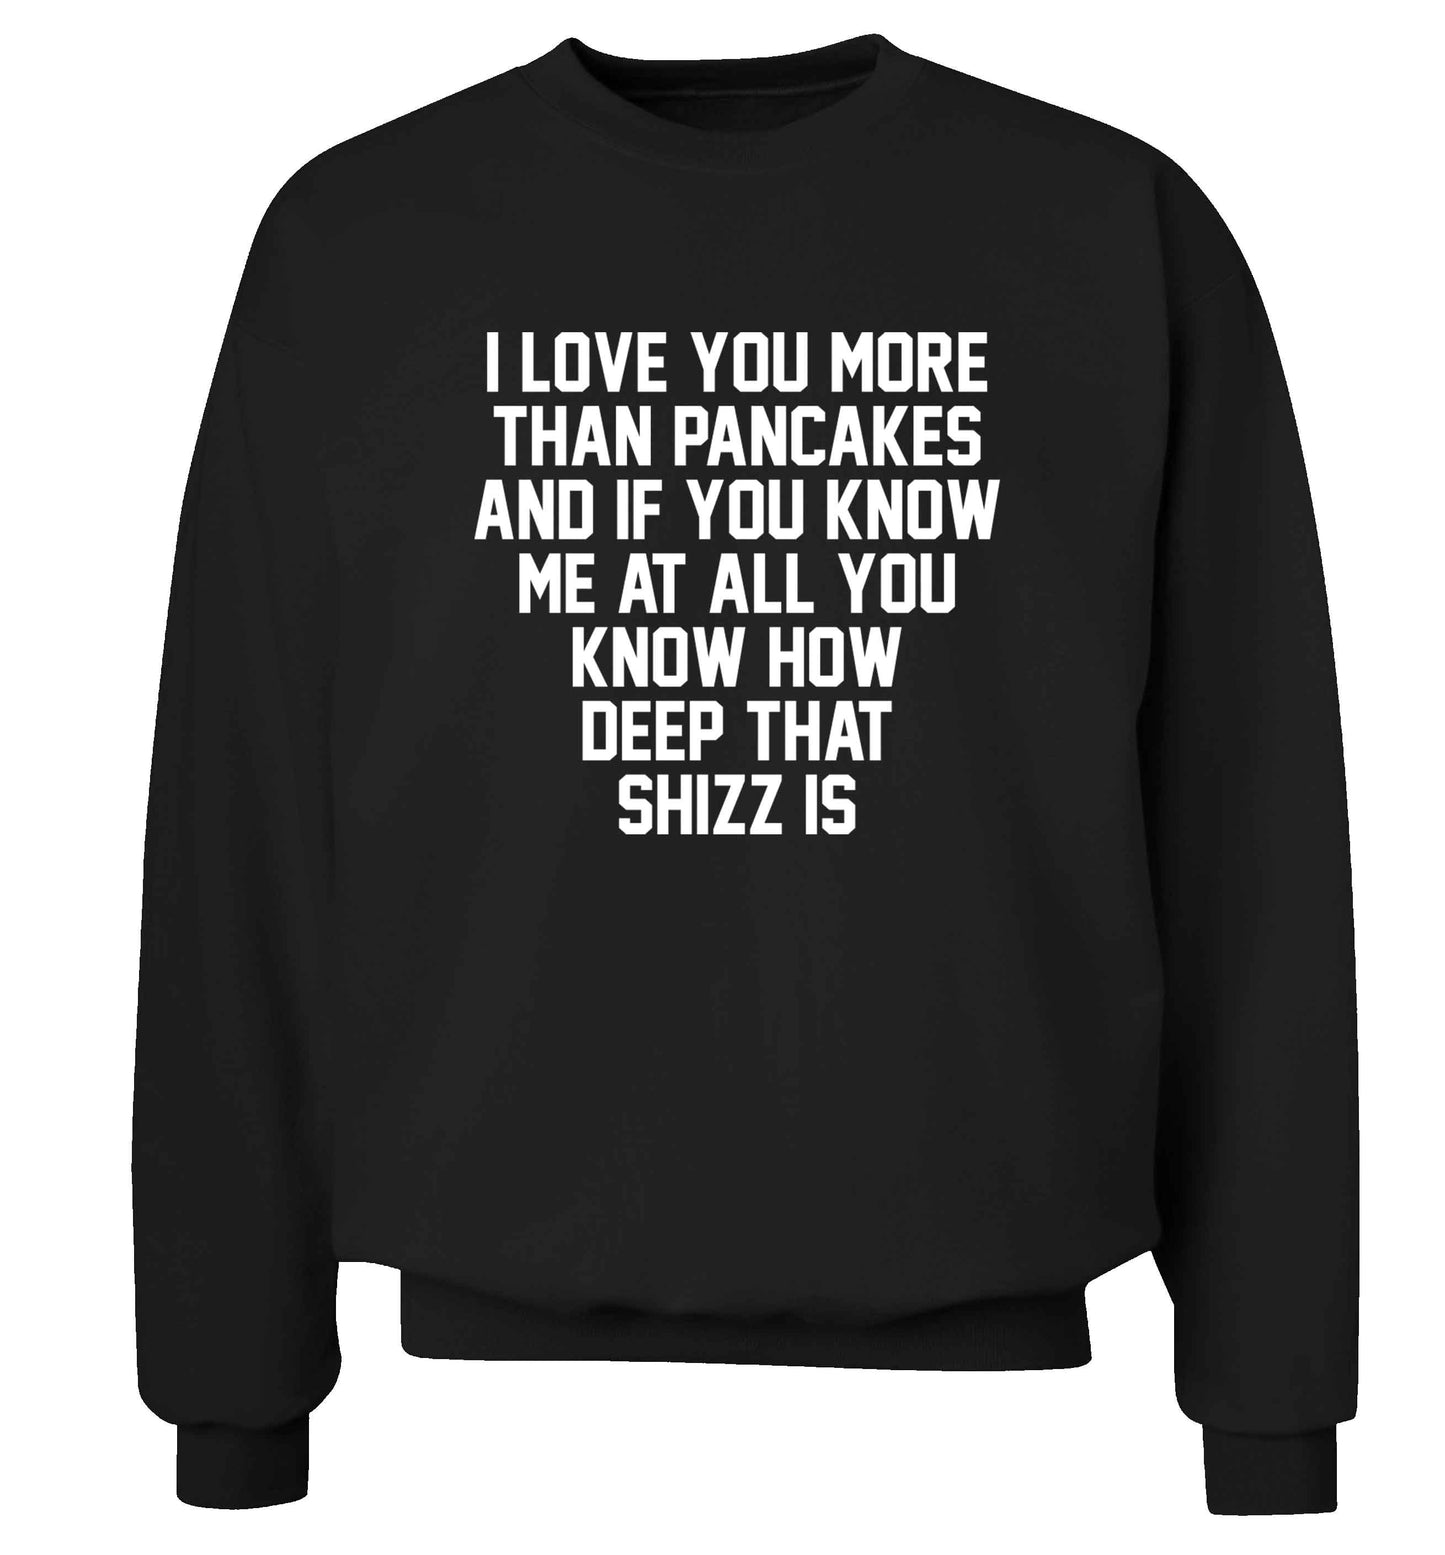 I love you more than pancakes and if you know me at all you know how deep that shizz is adult's unisex black sweater 2XL